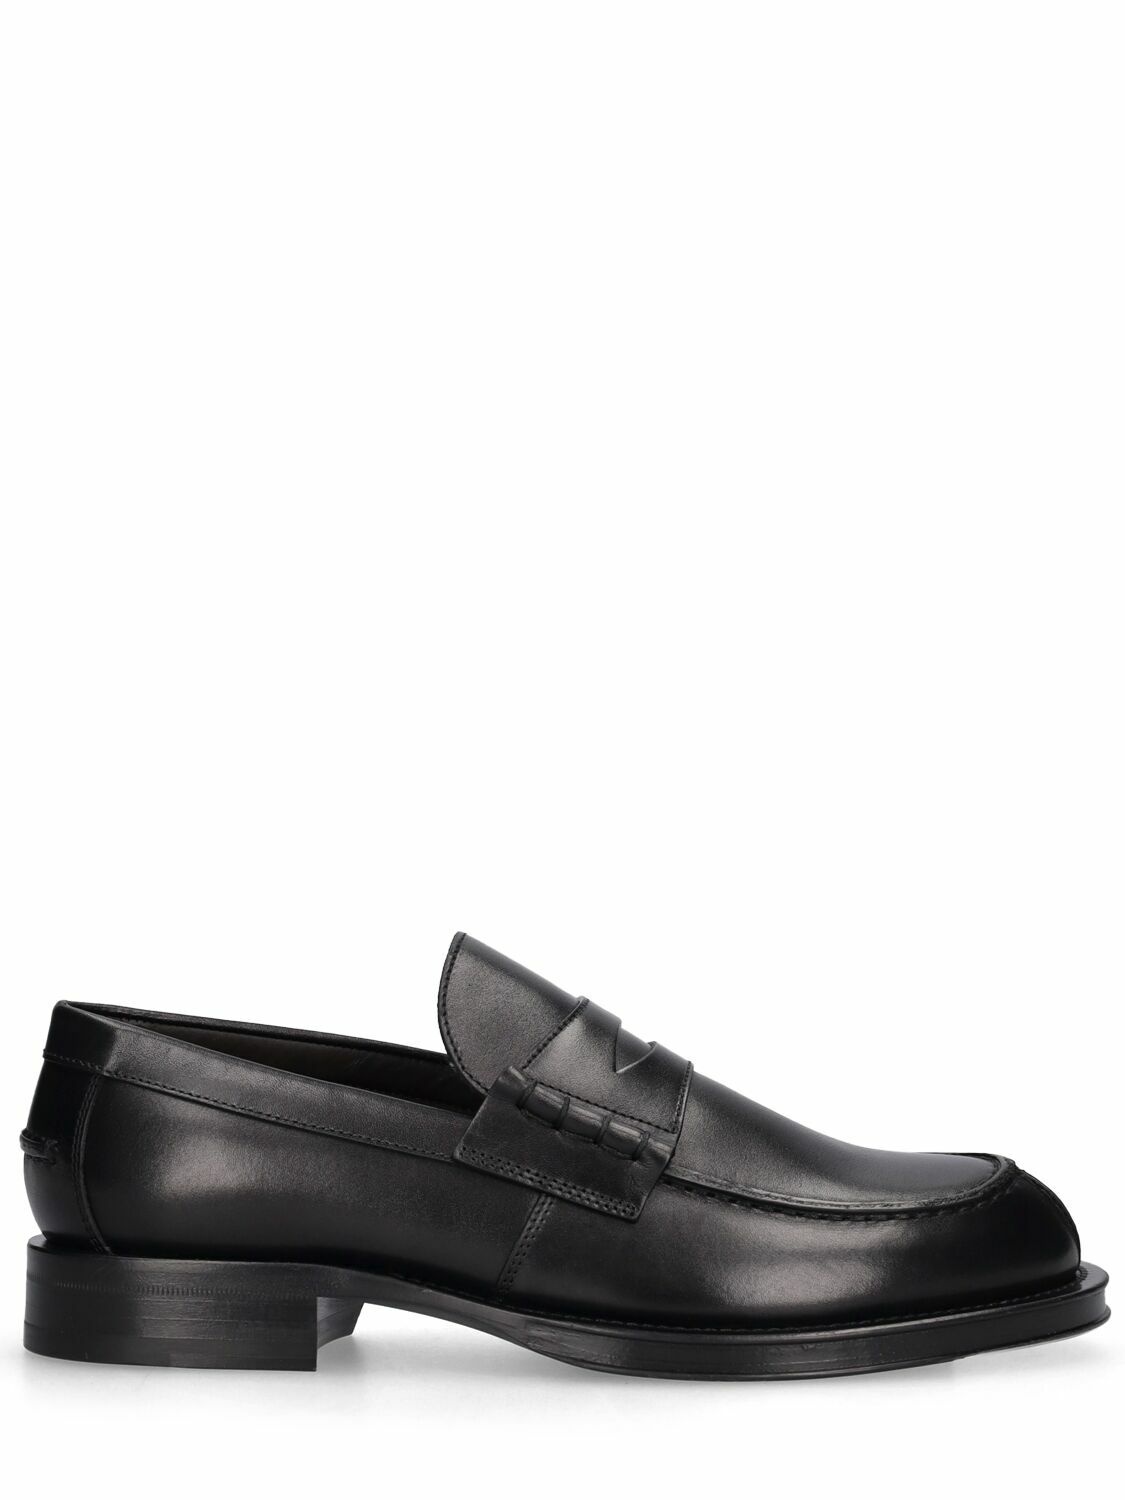 Photo: LANVIN - Medley Loafers